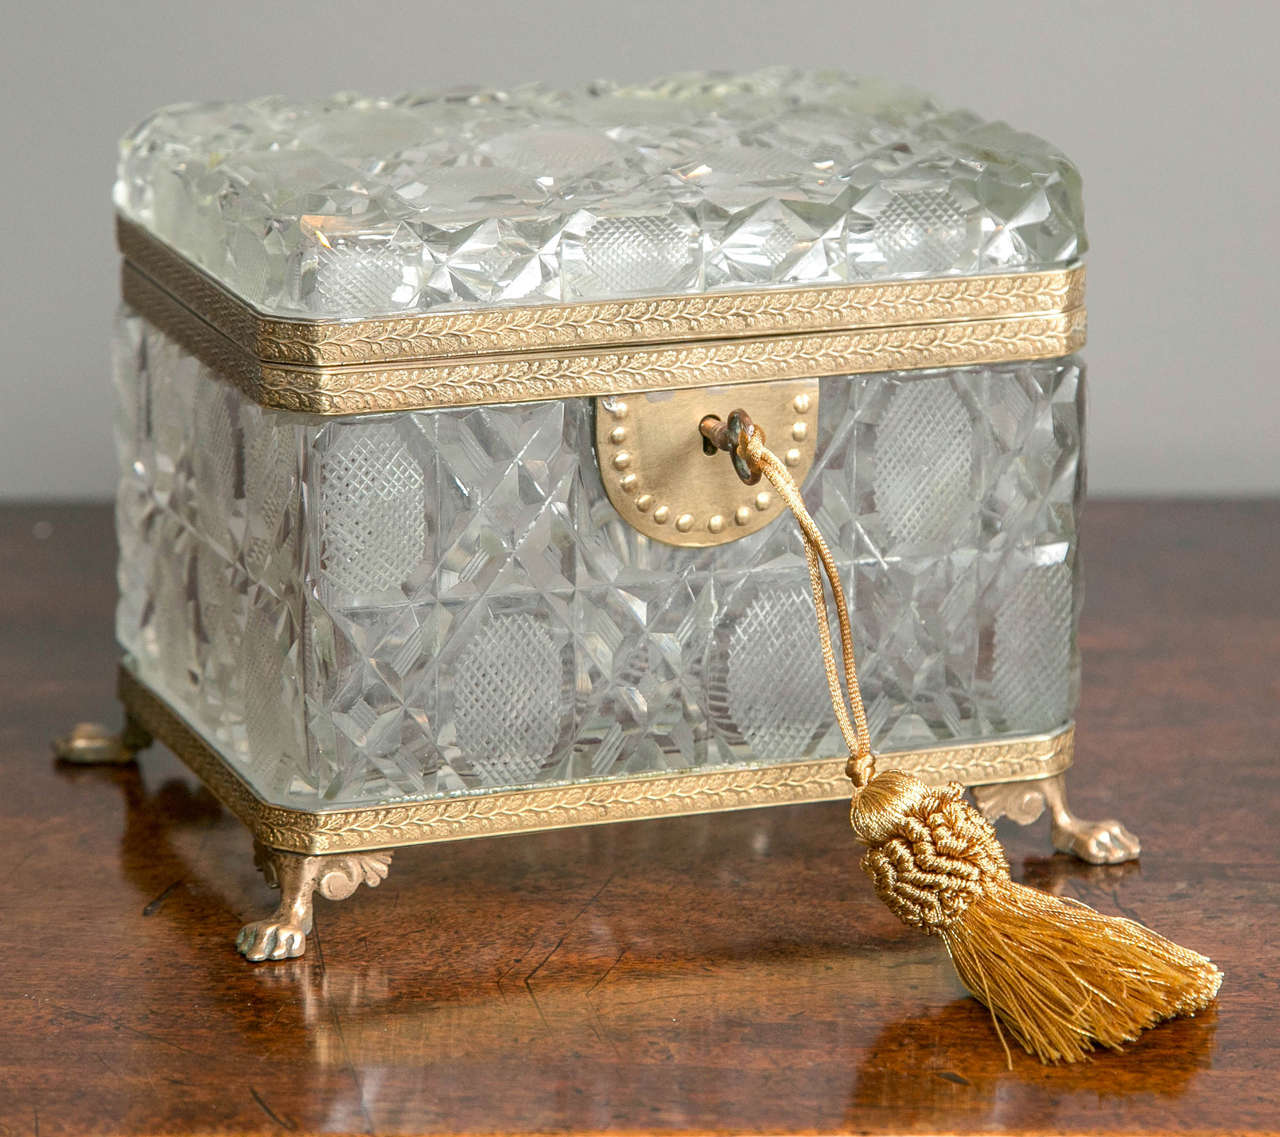 A large antique cut crystal box with bronze mounts and feet with a key.